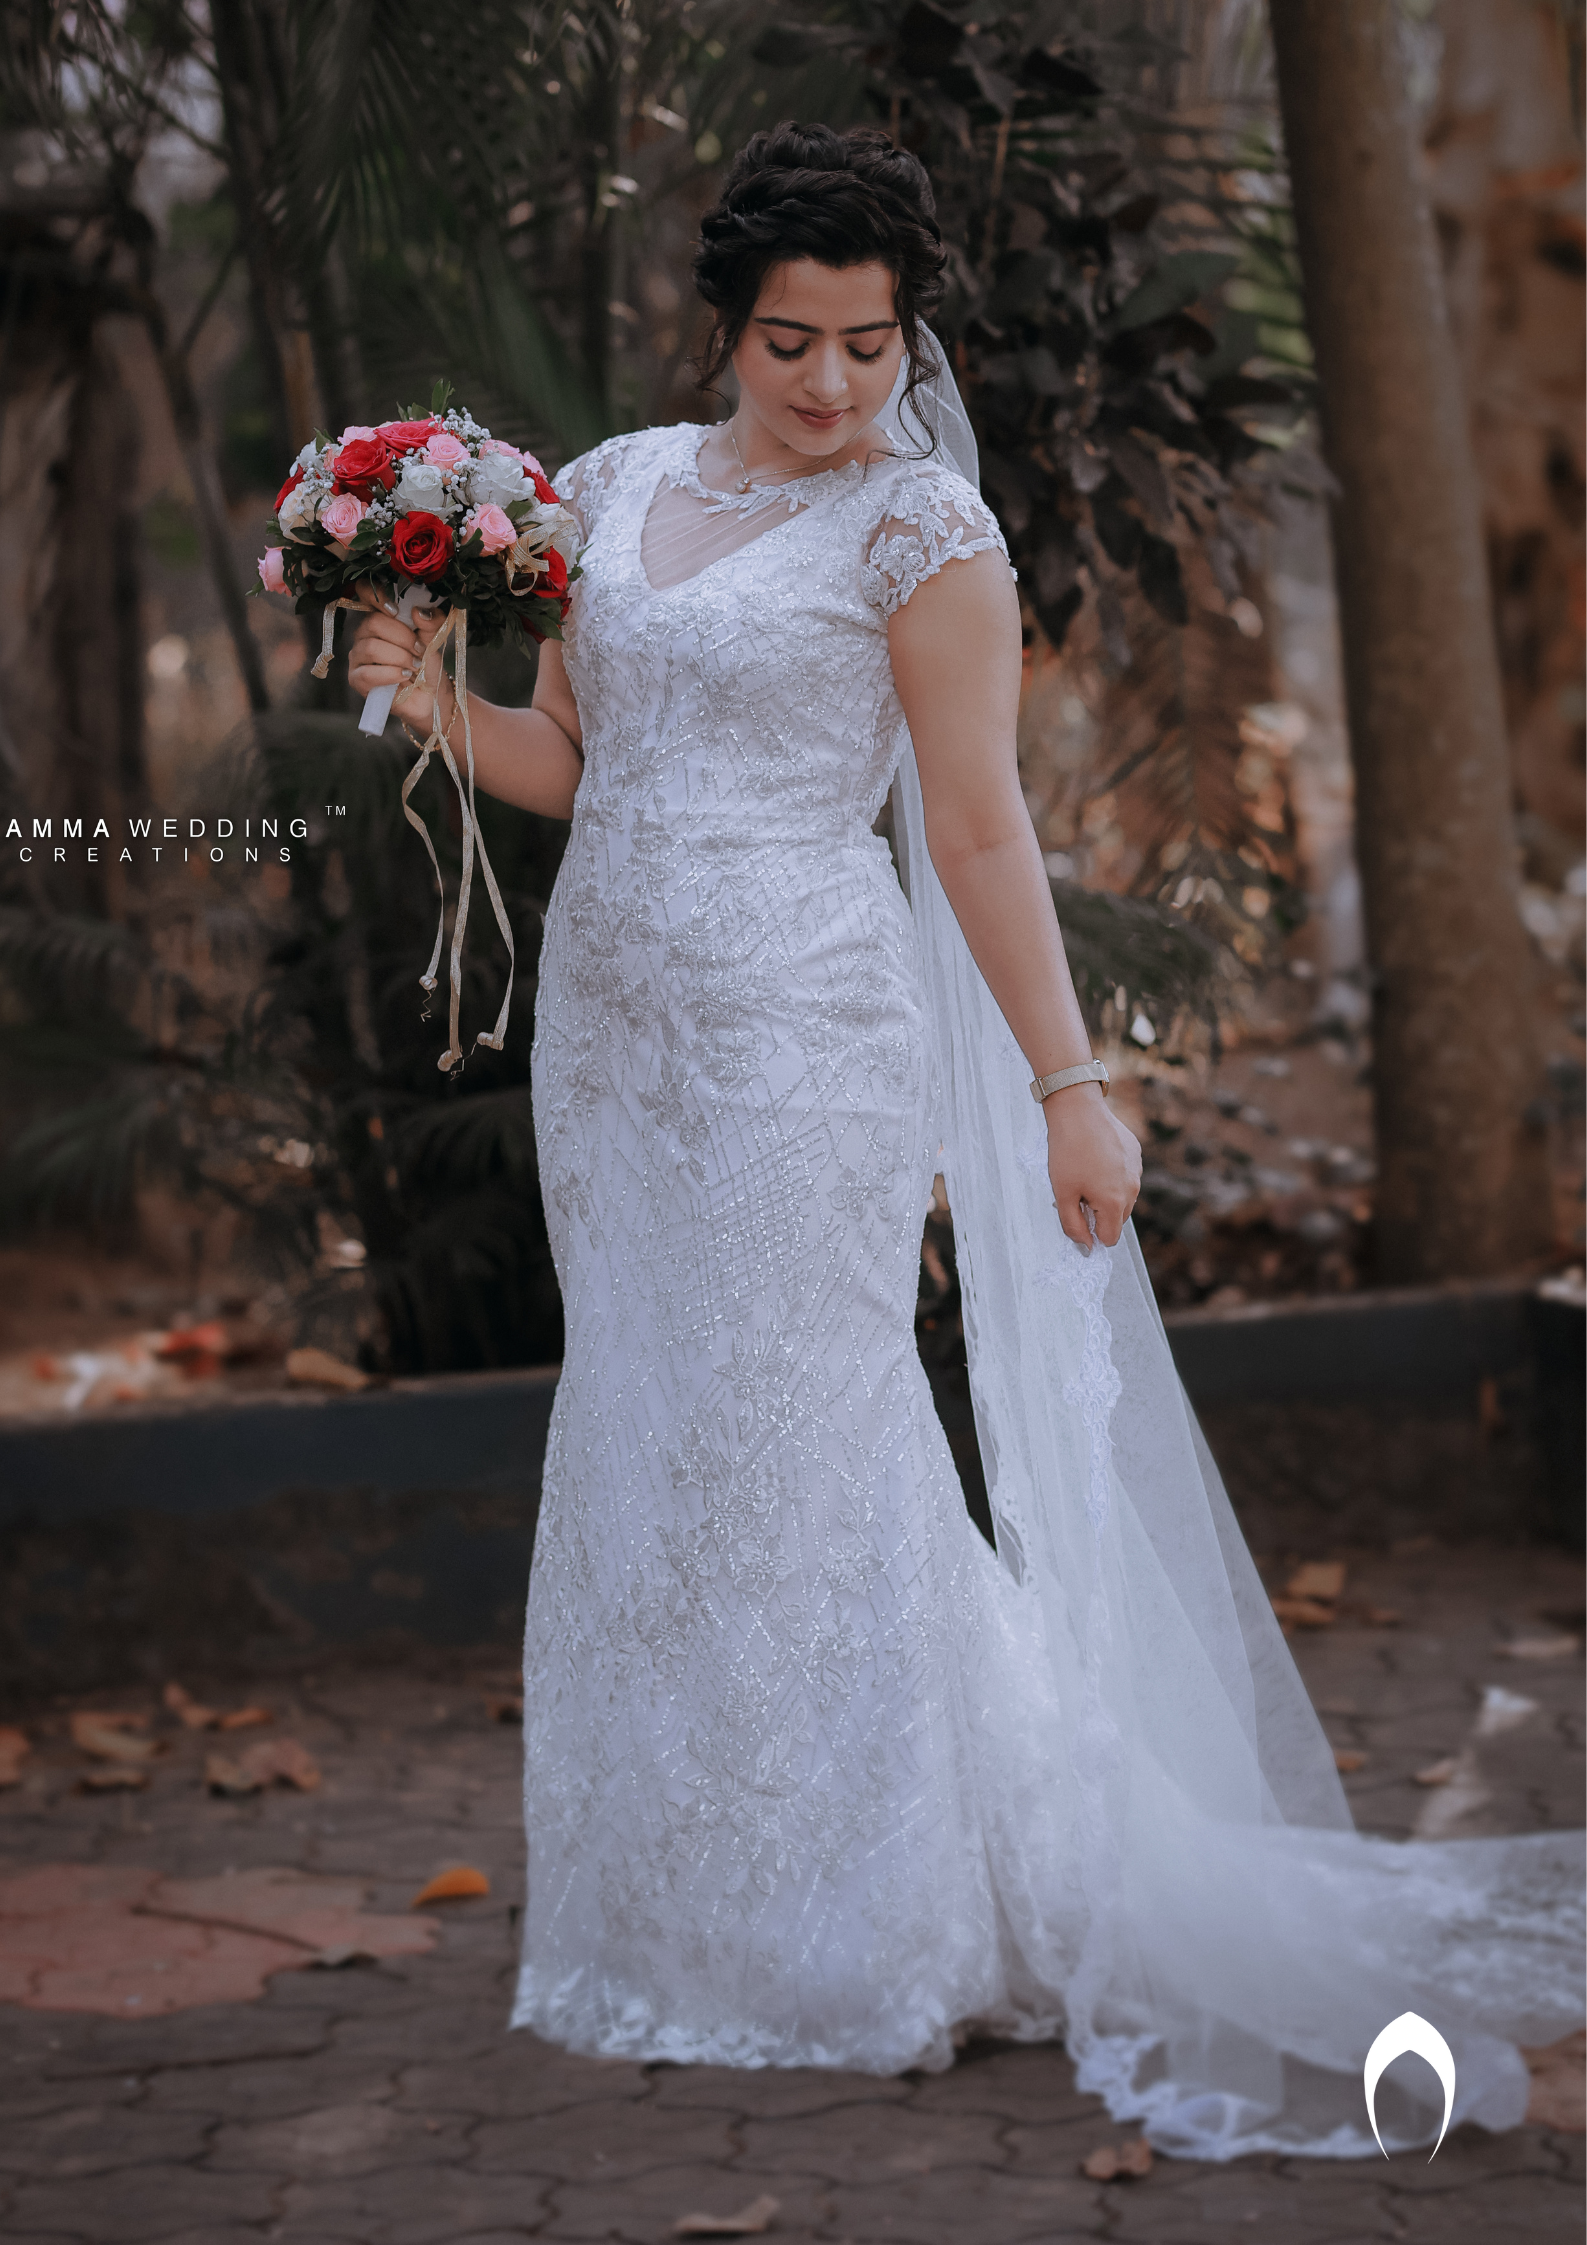 Christian Bridal Gowns (Simple)